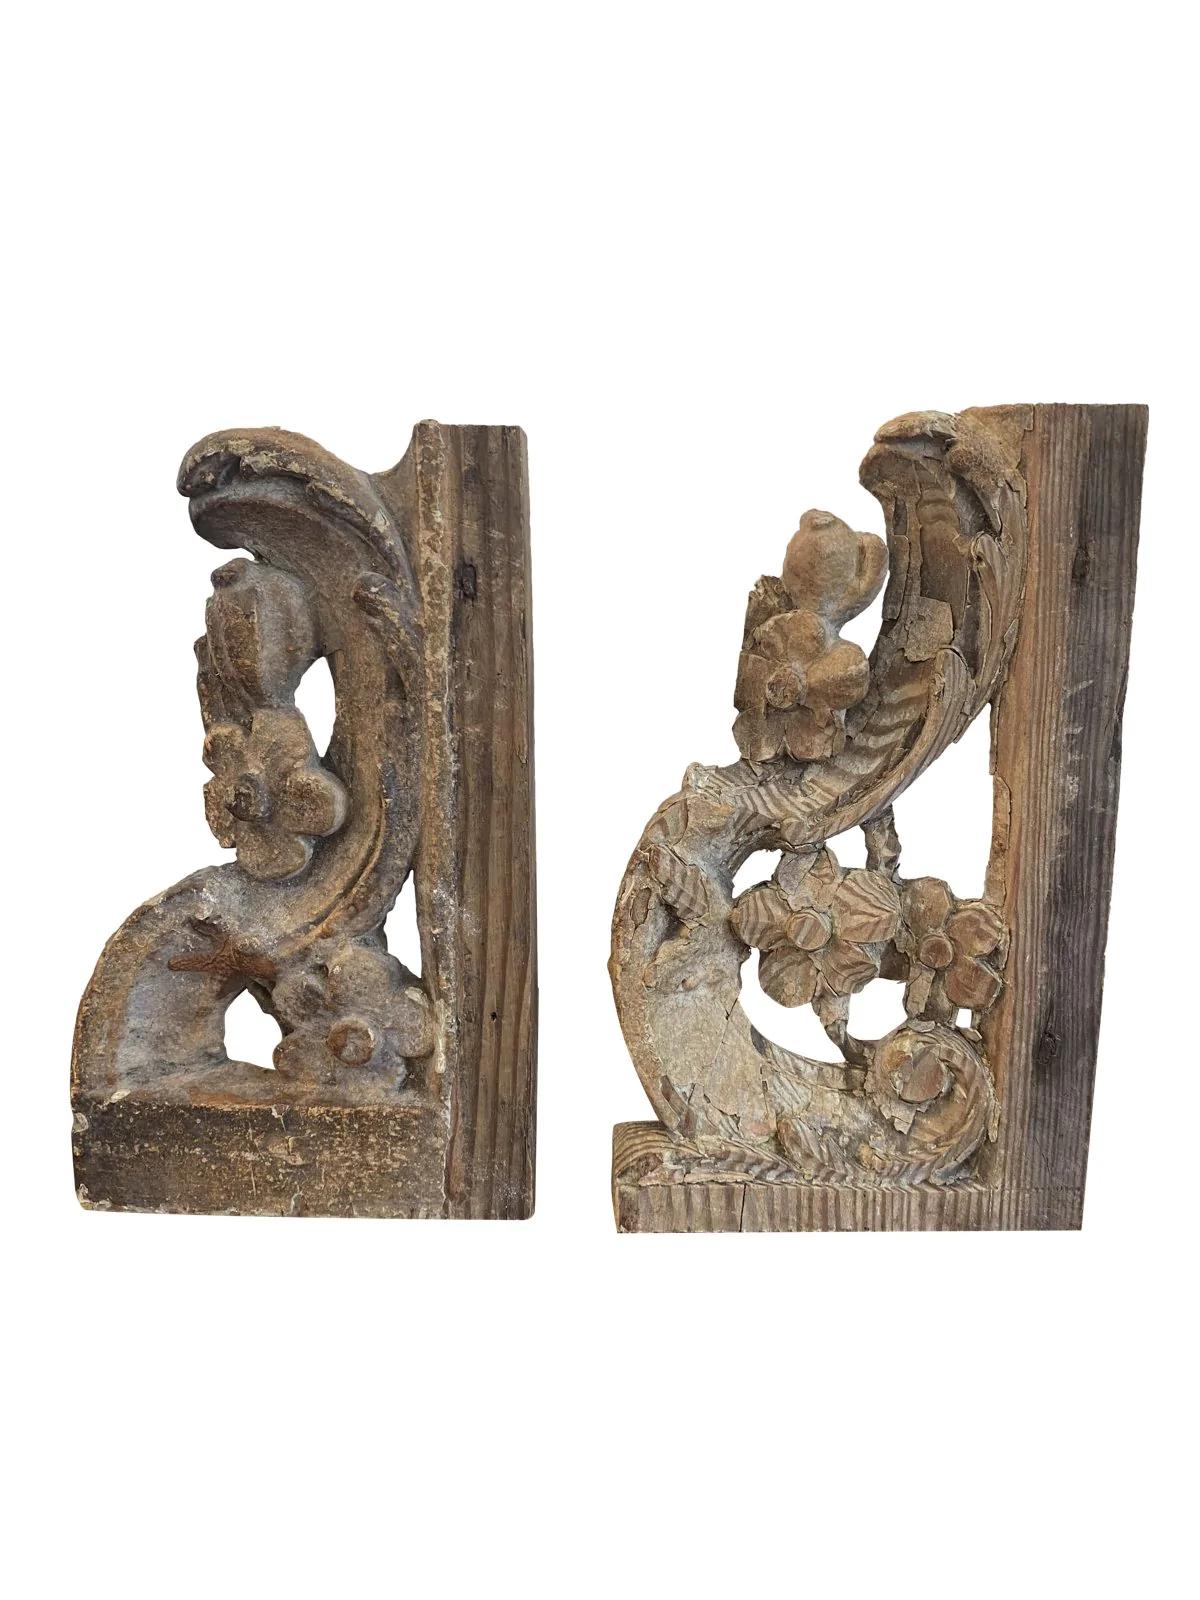 Pair of English carved stair brackets, c. 1760, both with a foliate S-curve adorned with flowers.
